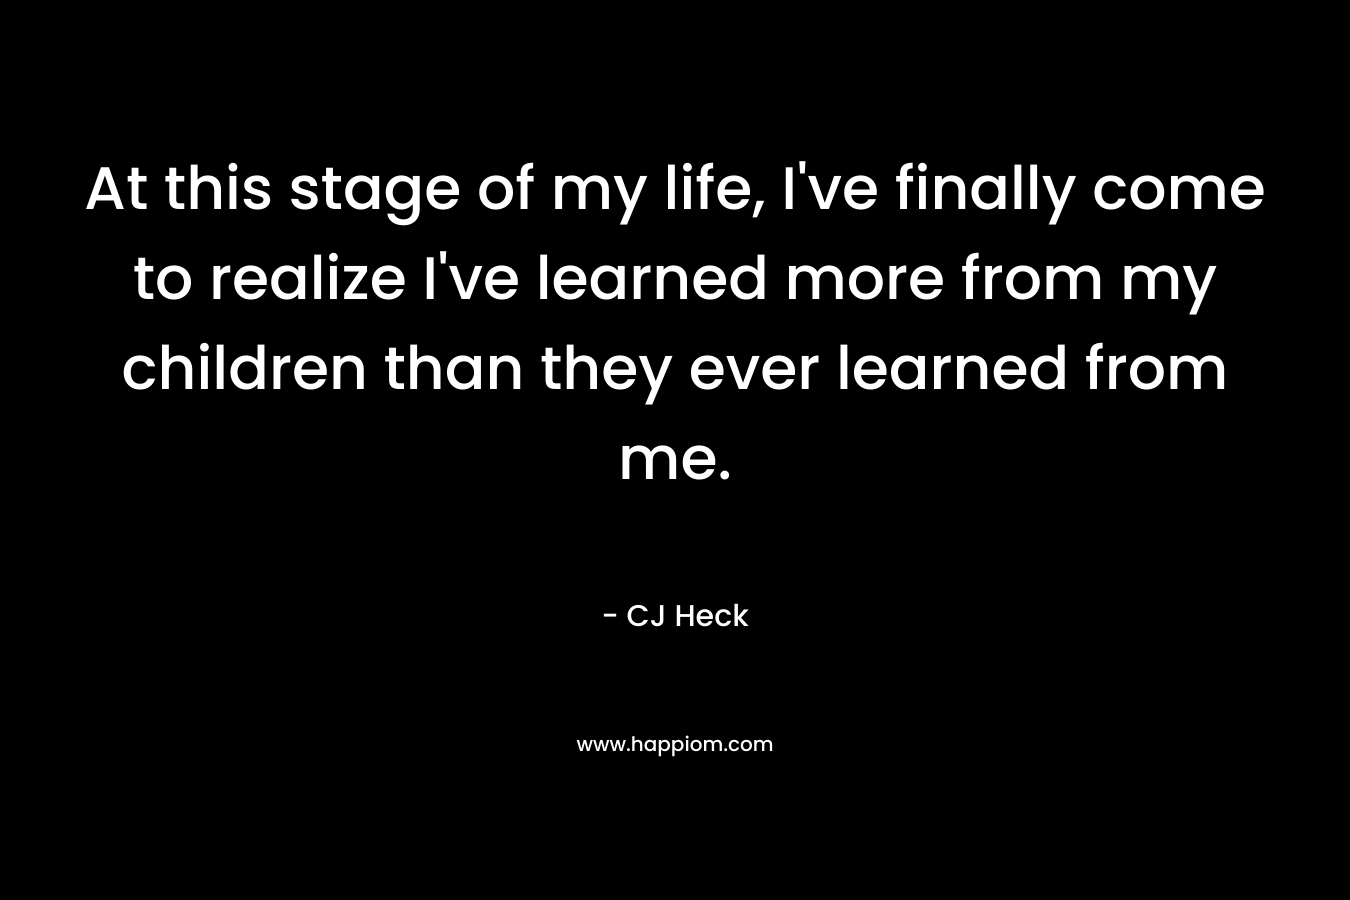 At this stage of my life, I’ve finally come to realize I’ve learned more from my children than they ever learned from me. – CJ Heck